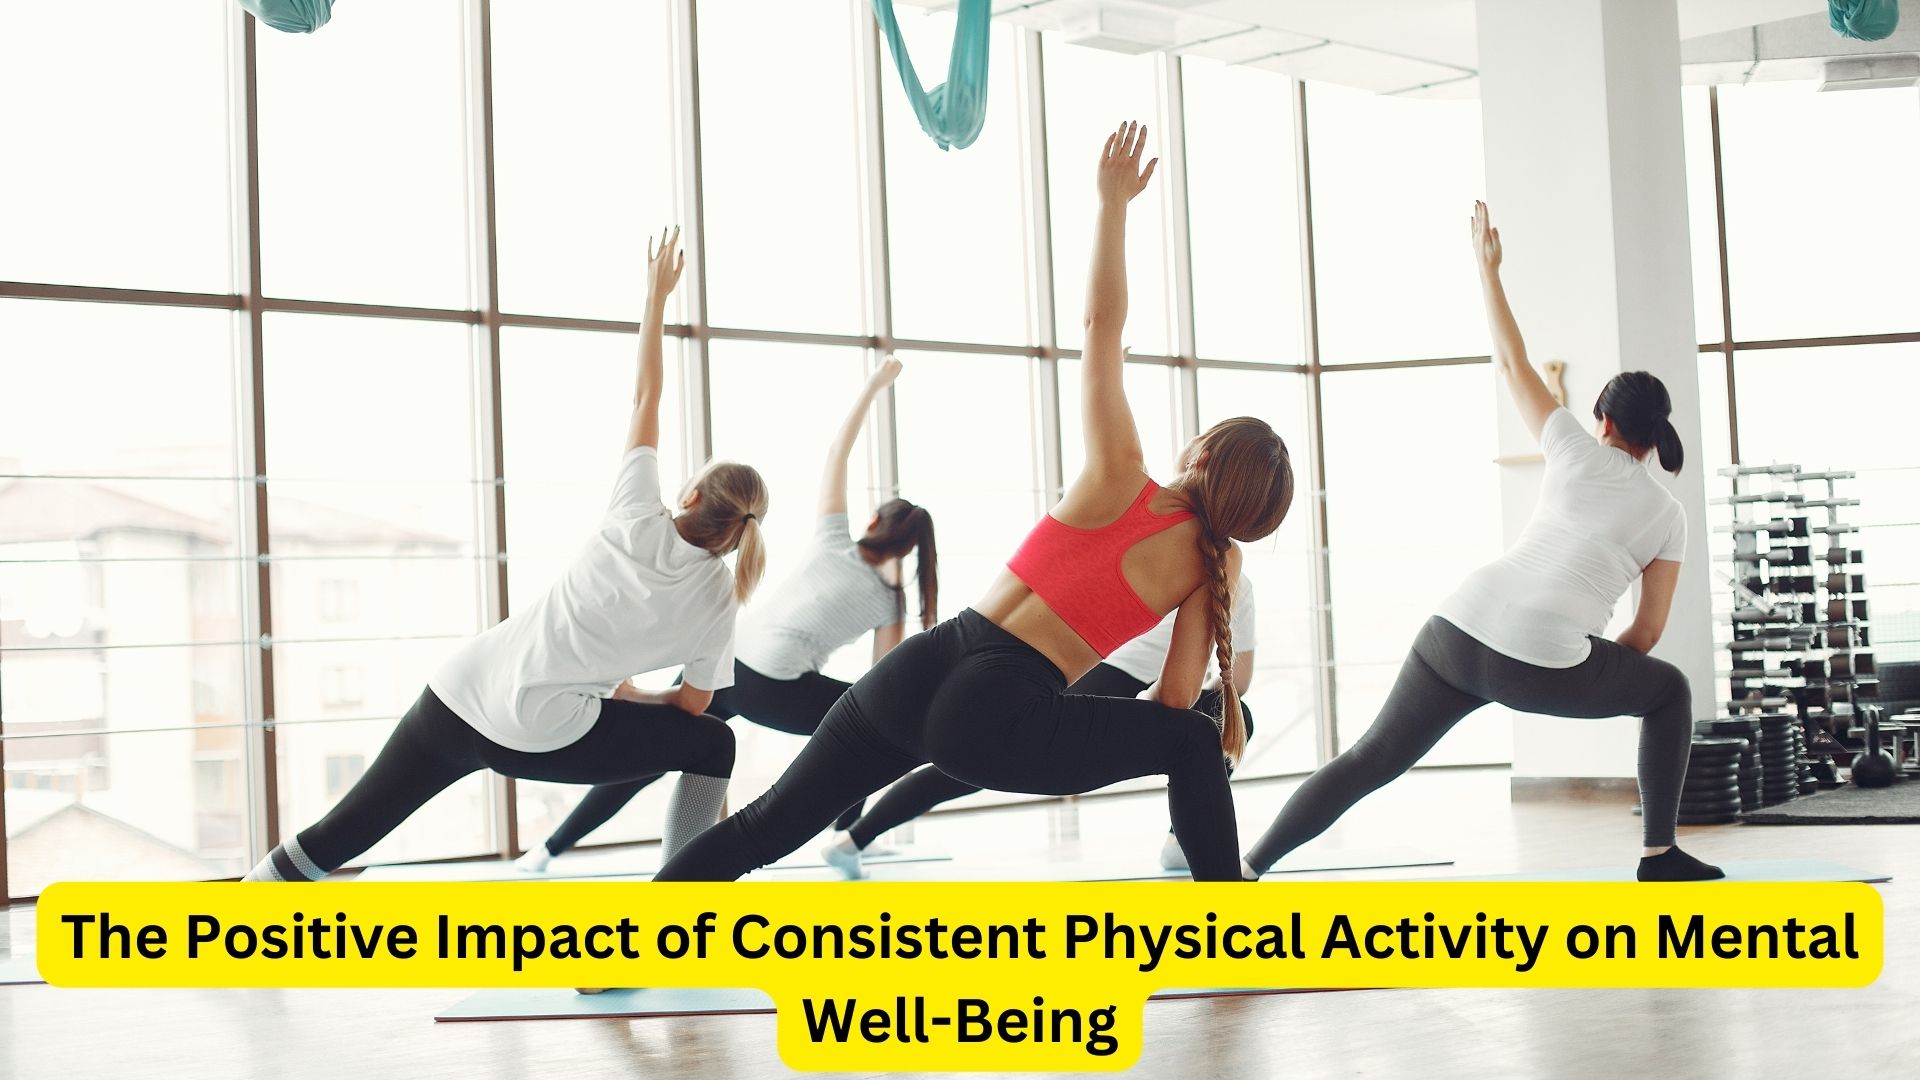 The Positive Impact of Consistent Physical Activity on Mental Well-Being